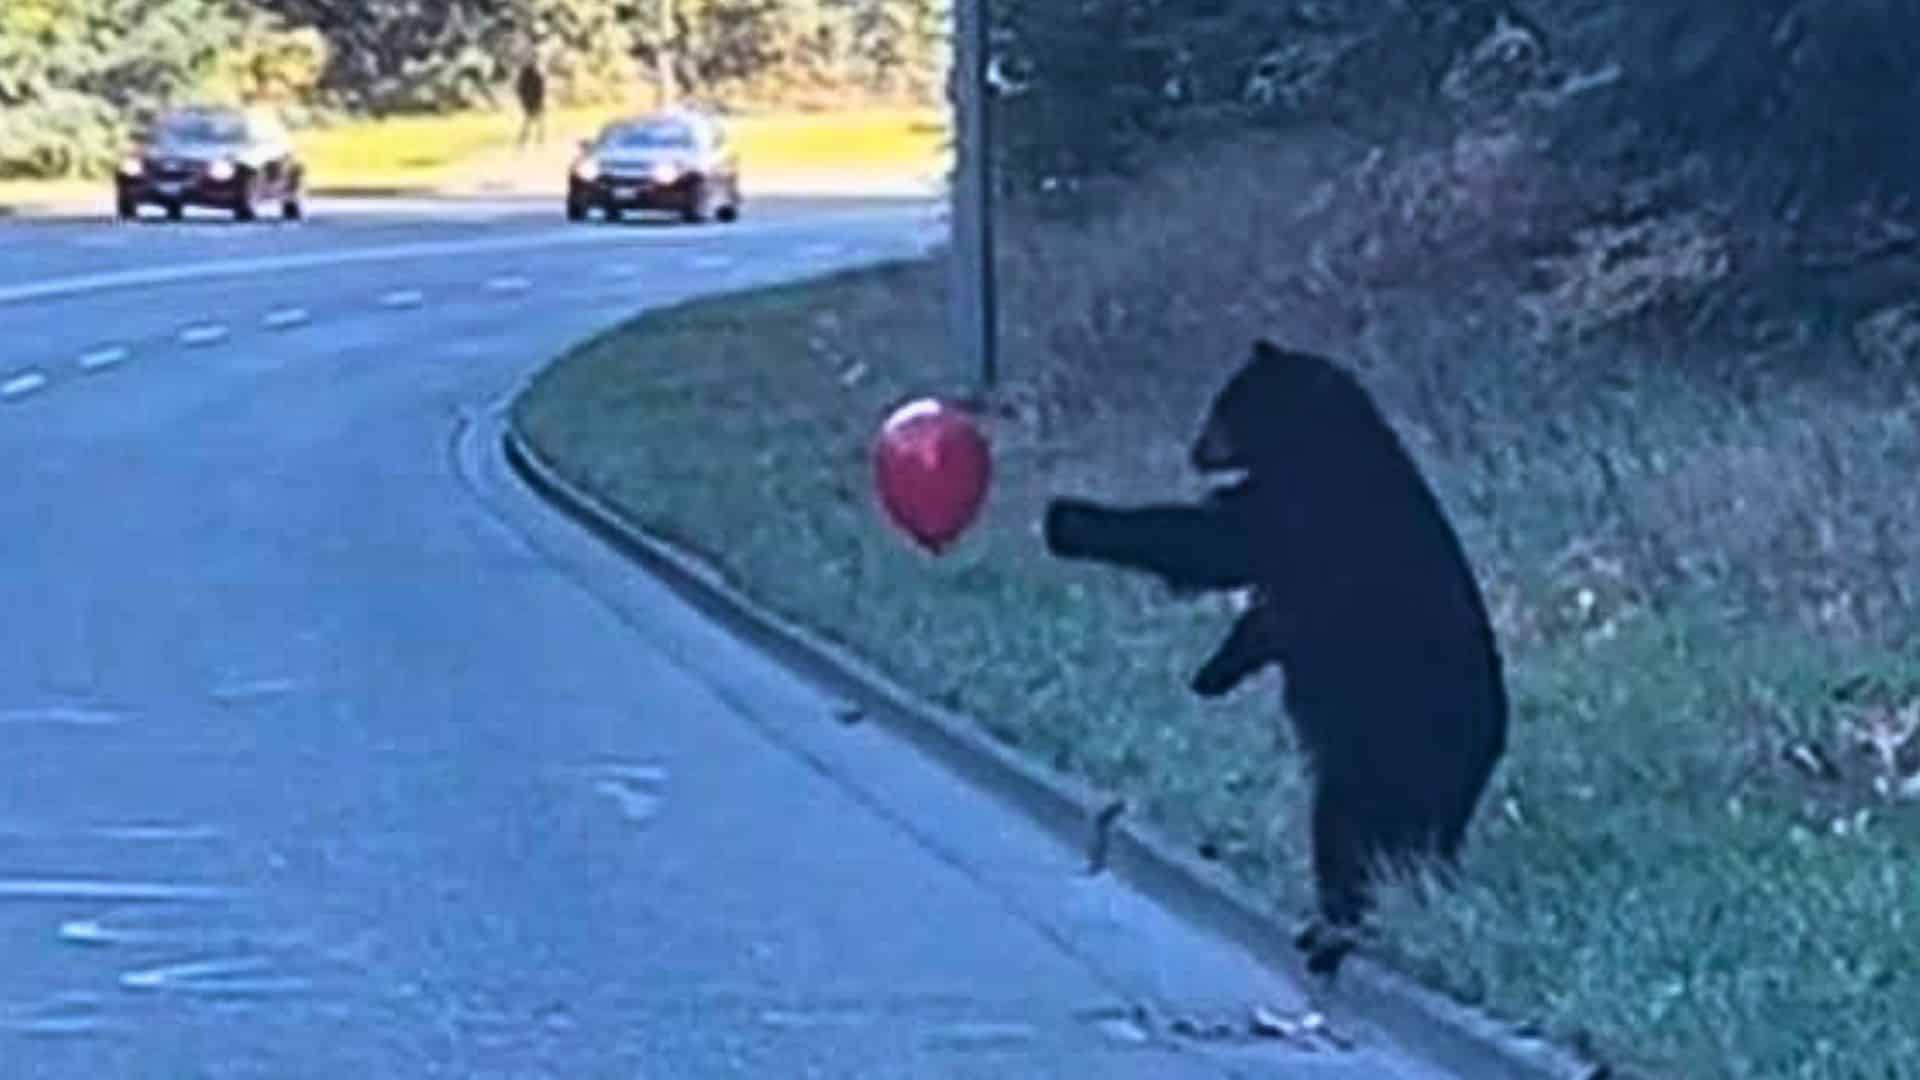 Black Bears playing with Red Balloon